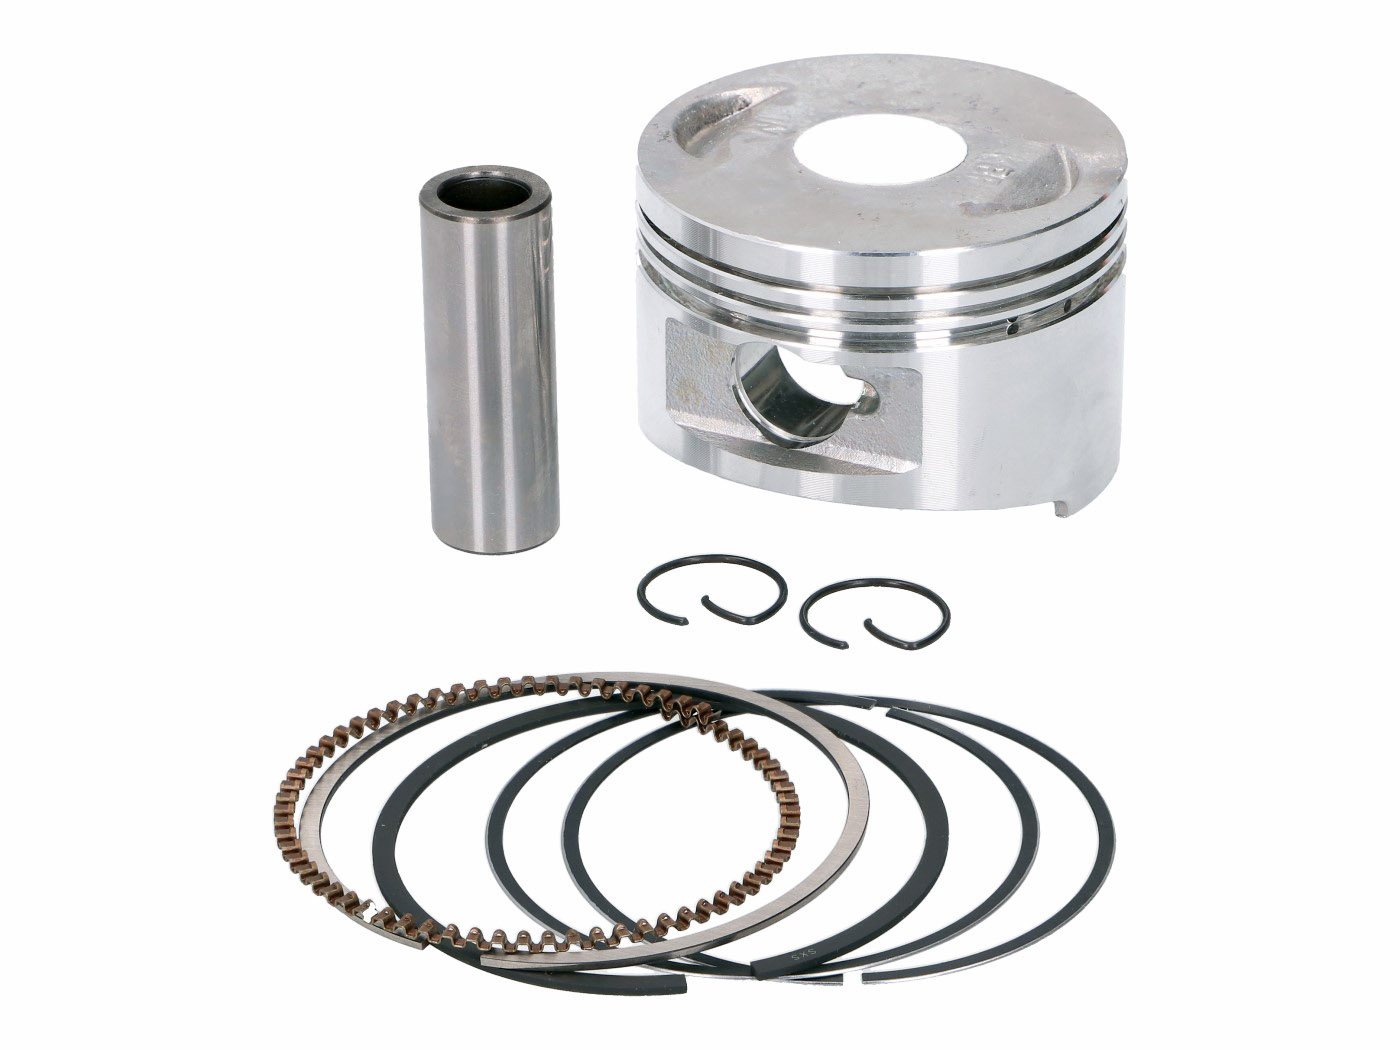 TWO  57.60mm.150cc X 2.5 mm THIN  PISTON RINGS SUITABLE FOR LAMBRETTA SCOOTERS. 